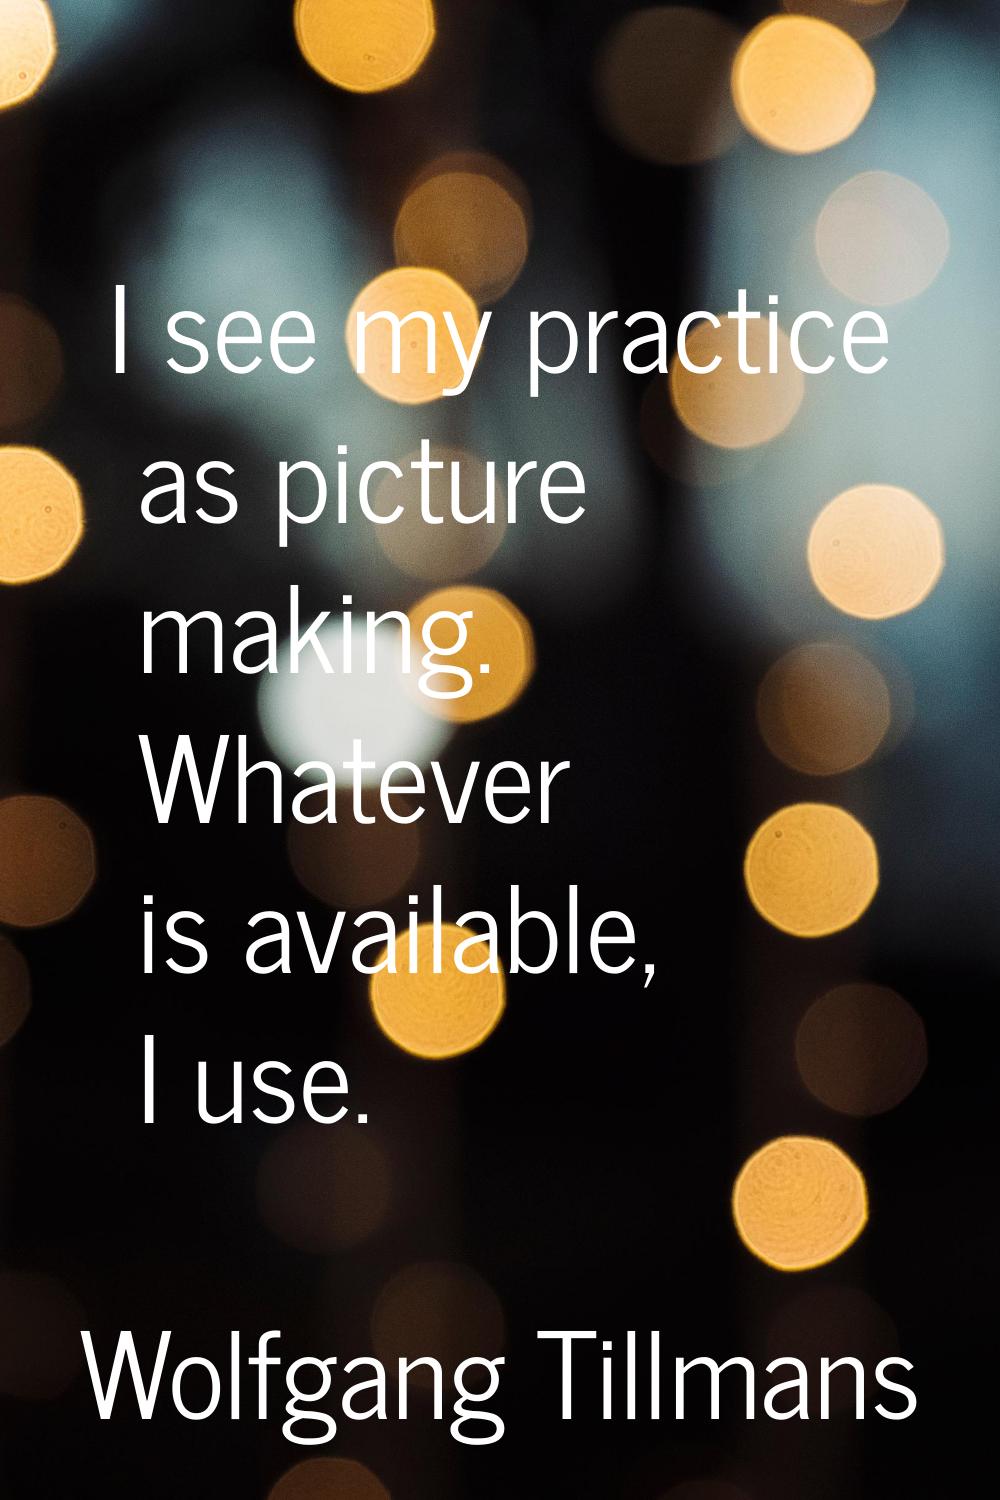 I see my practice as picture making. Whatever is available, I use.